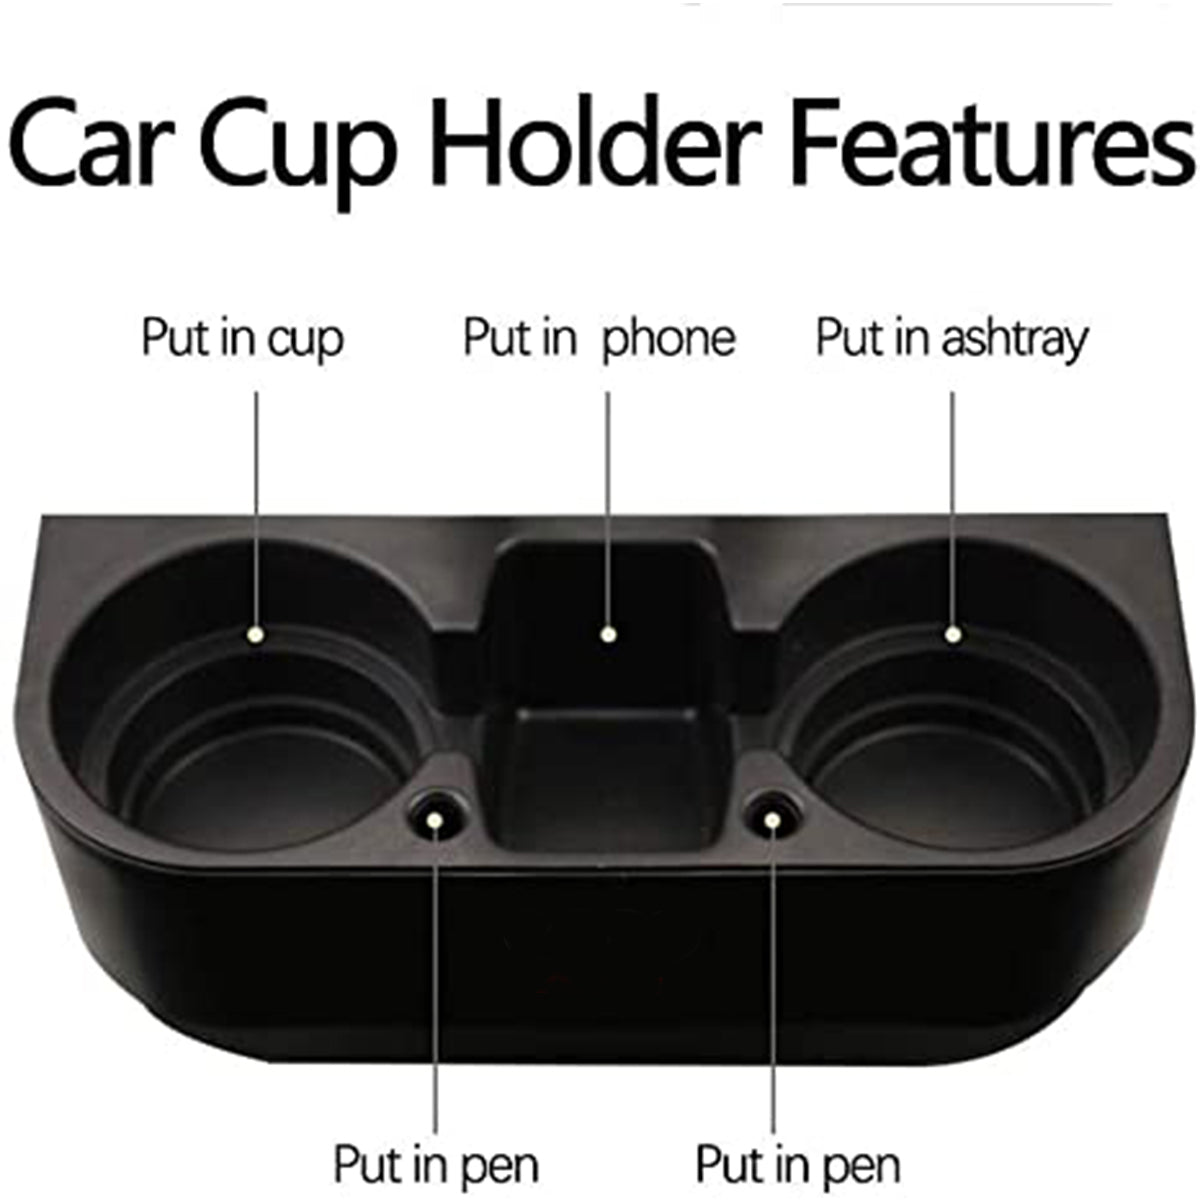 Delicate Leather Cup Holder Portable Multifunction Vehicle Seat Cup Cell Phone Drinks Holder Box Car Interior Organizer, Custom For Your Cars, Car Accessories PF11995 - Delicate Leather